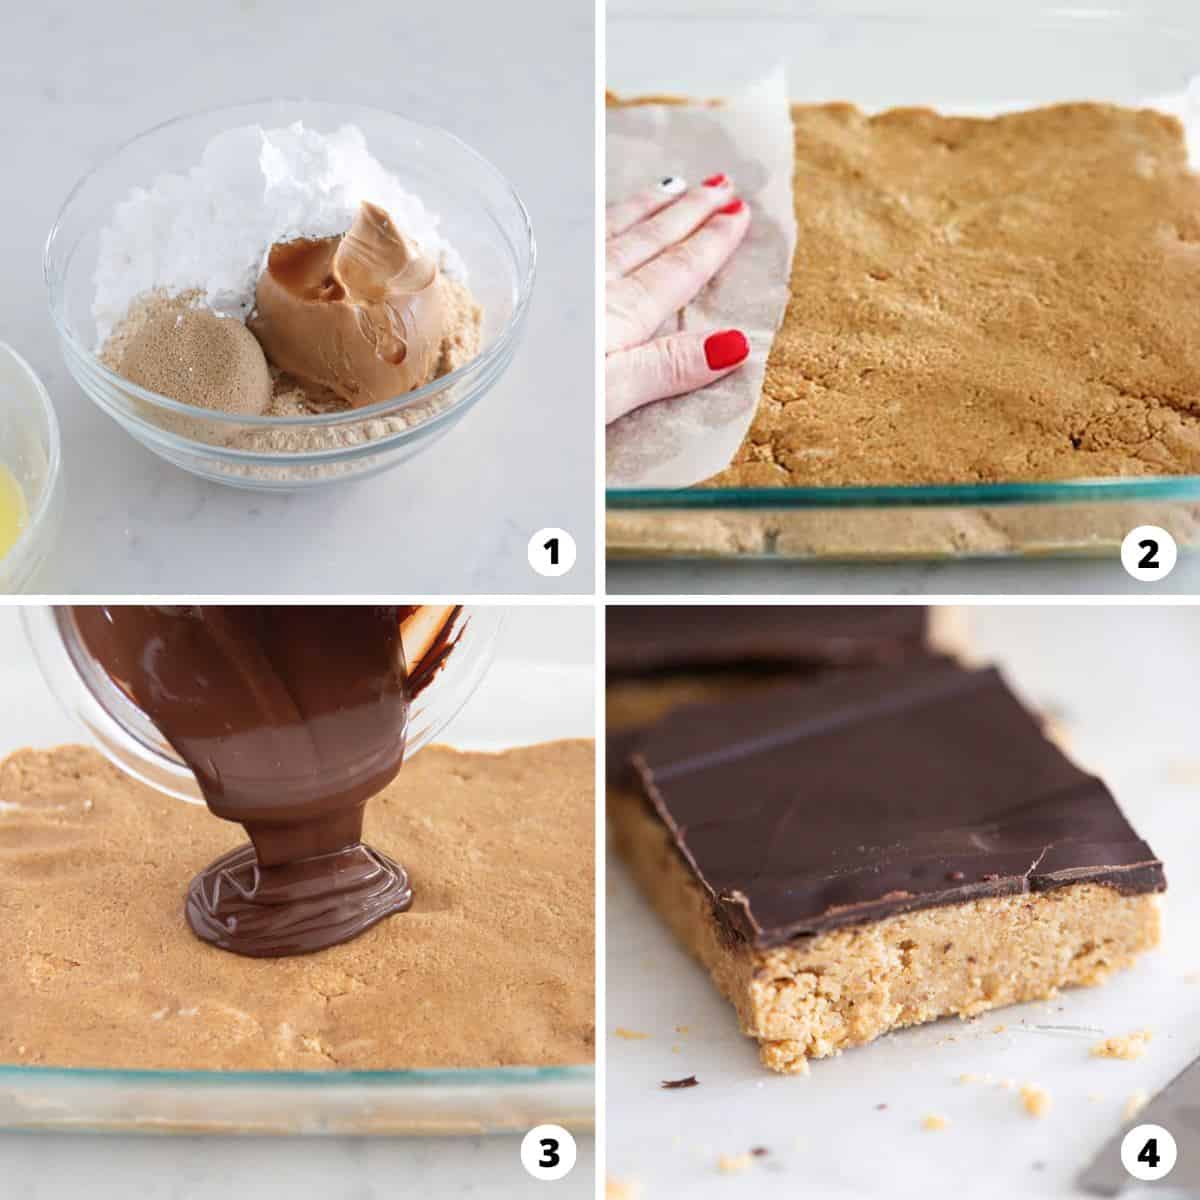 Showing how to make no bake peanut butter bars in a 4 step collage.